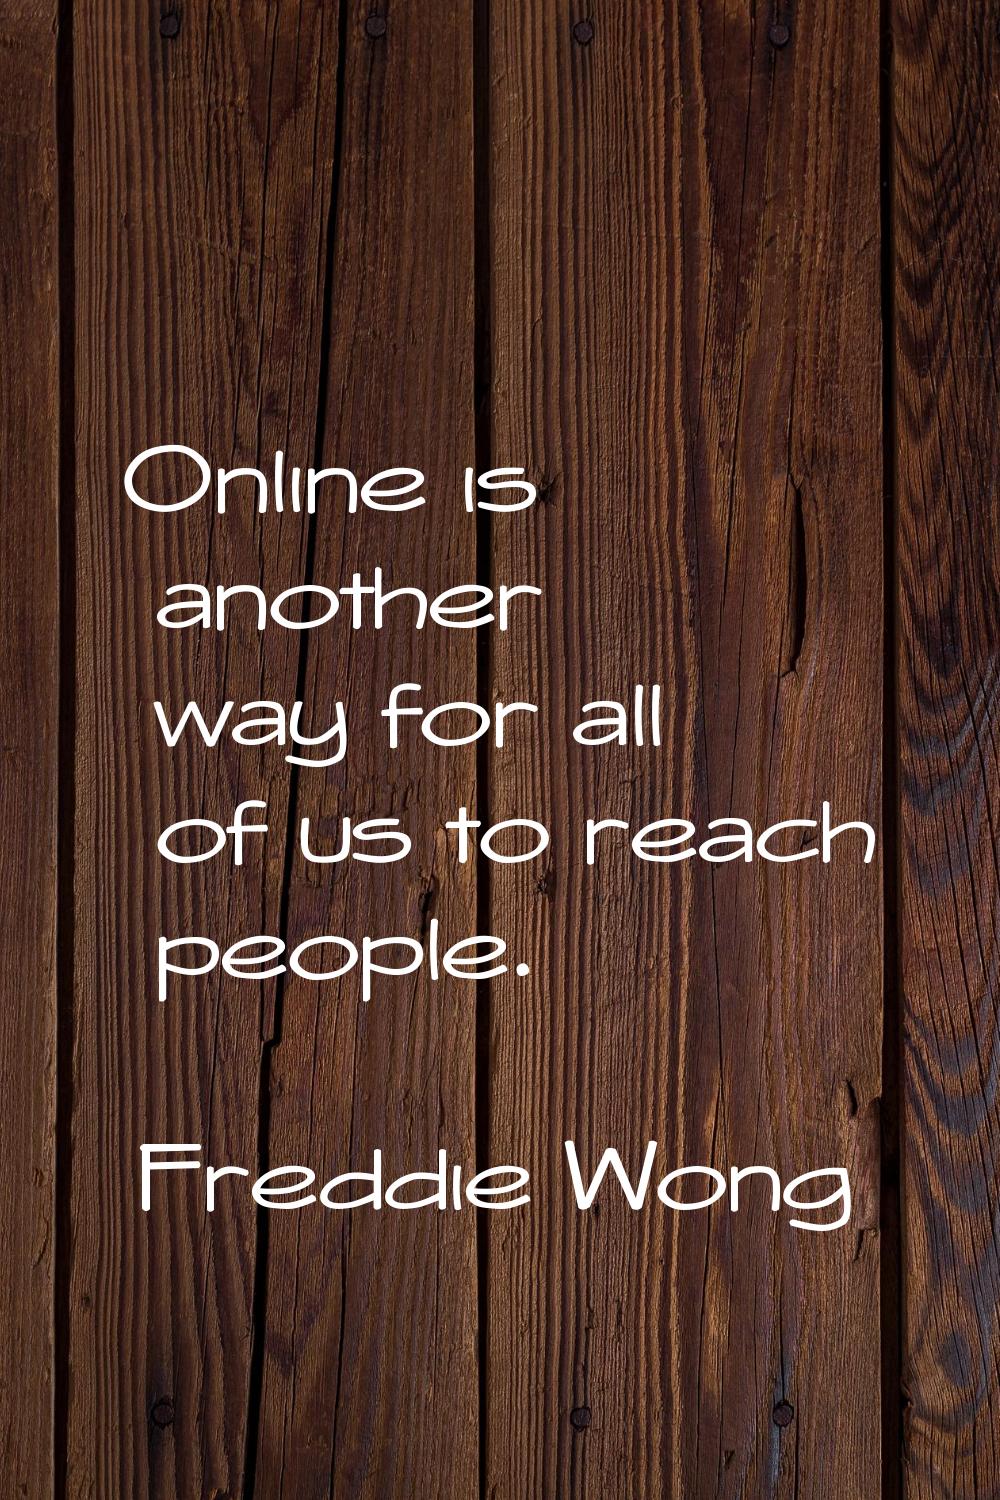 Online is another way for all of us to reach people.